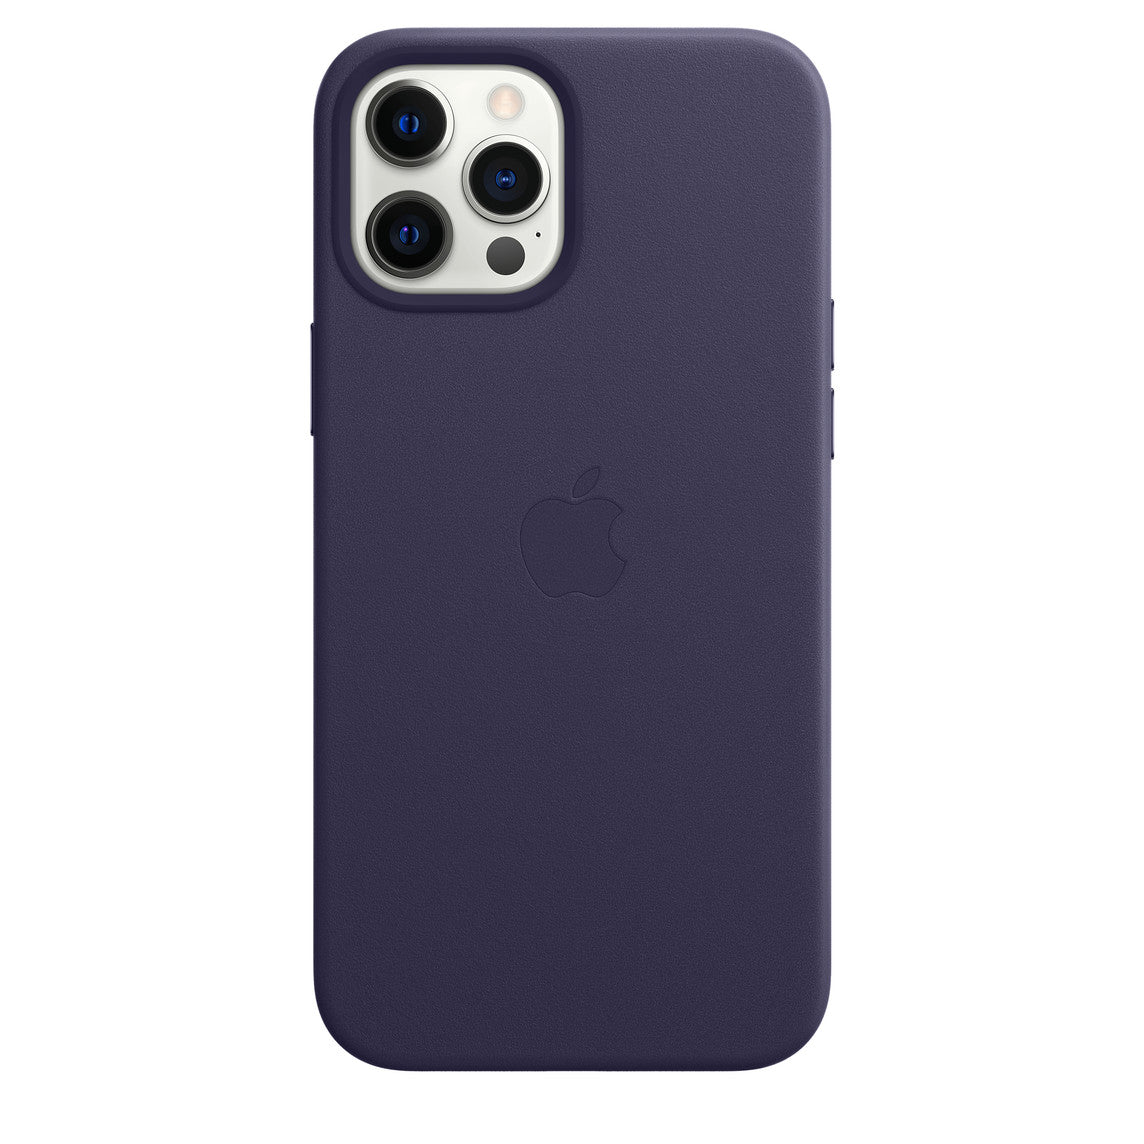 Apple iPhone 12 Pro Max Leather Case - Deep Violet - Brand New